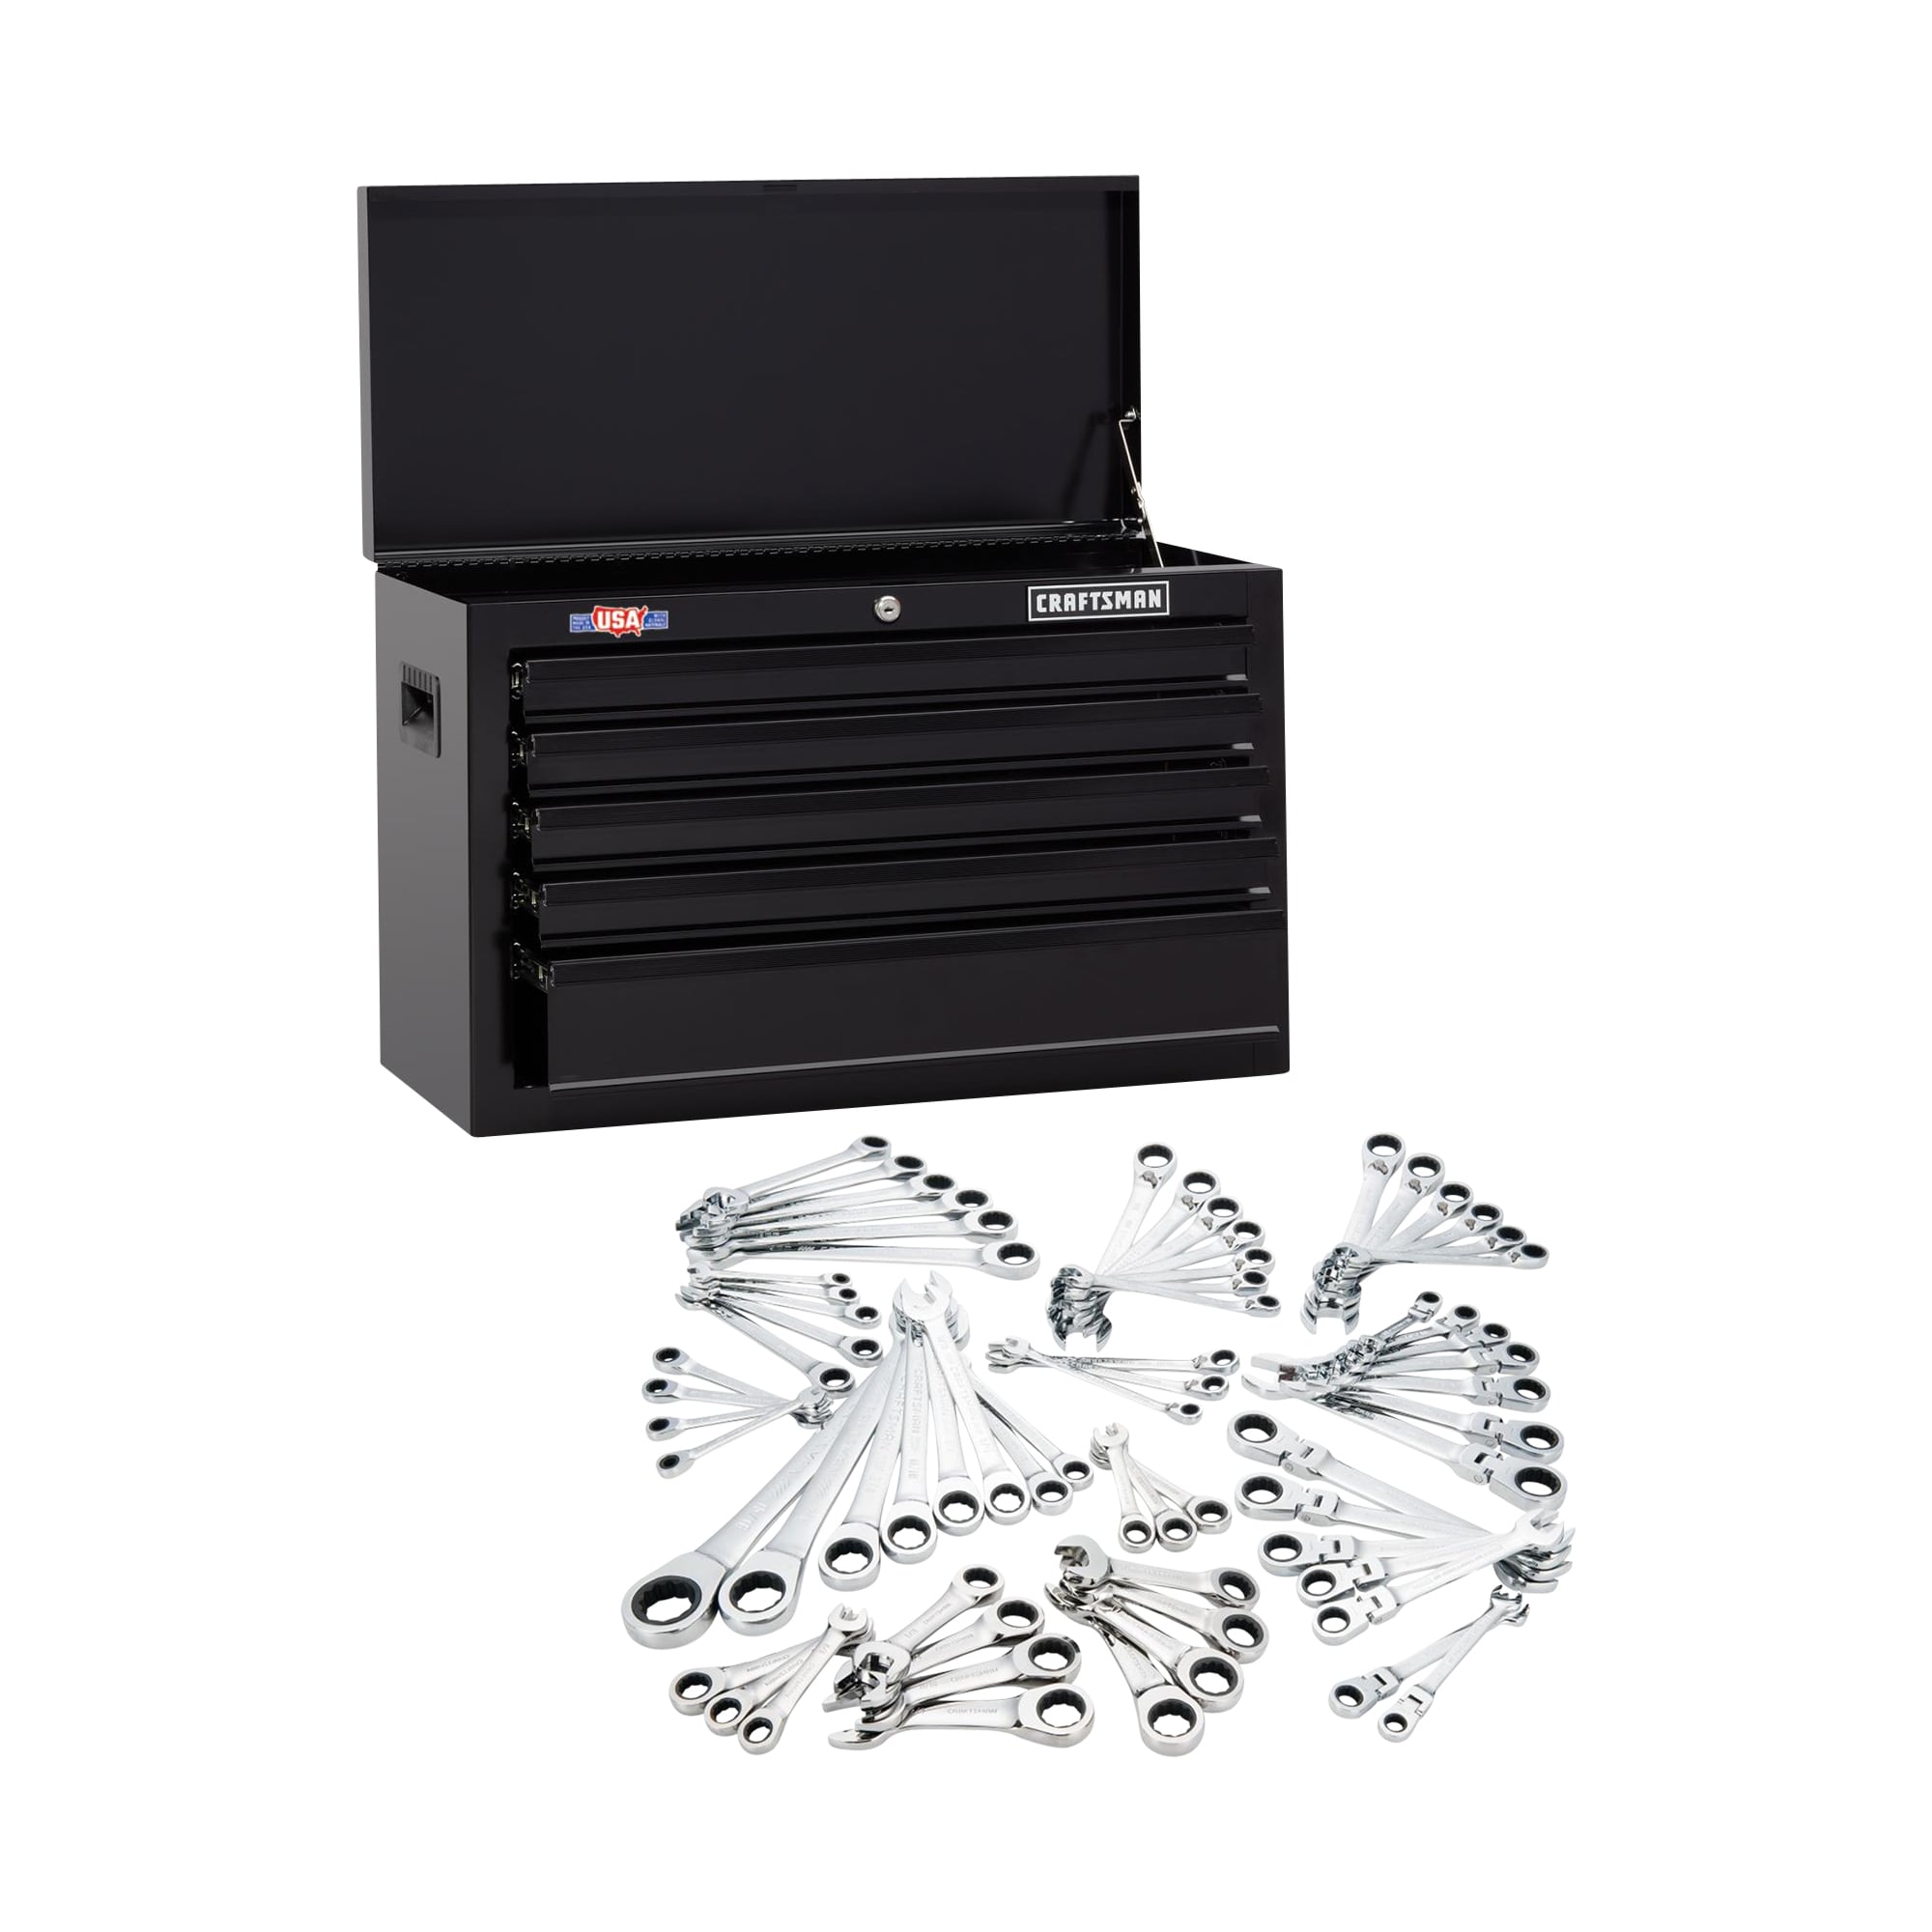 CRAFTSMAN 1000 Series 26-in W x 17.25-in H 5-Drawer Steel Tool Chest (Black) & 67-PC Ratcheting Wrench Set